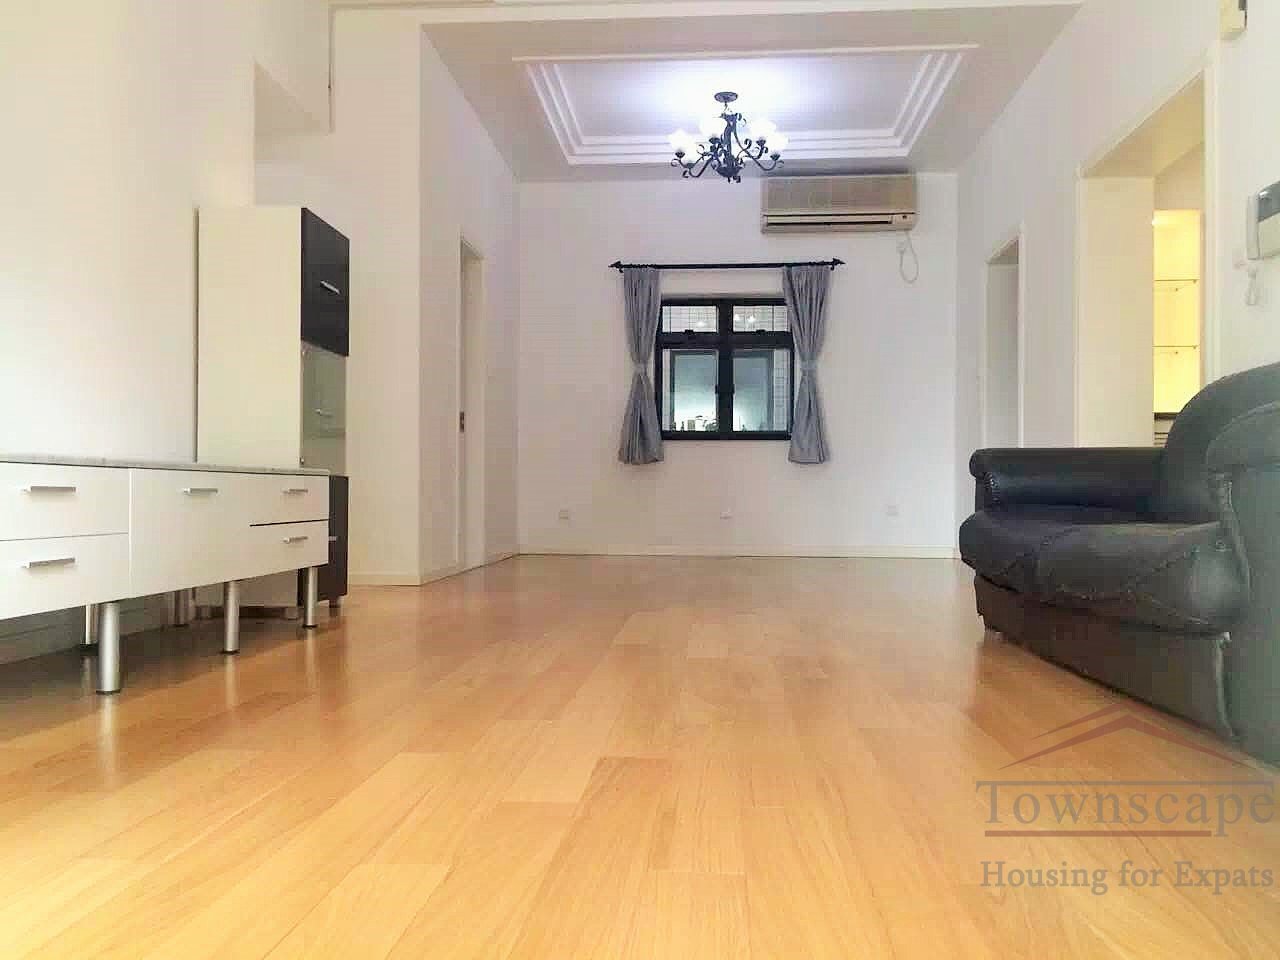  2+1BR Apartment for rent in Ambassy Court, TOP compound